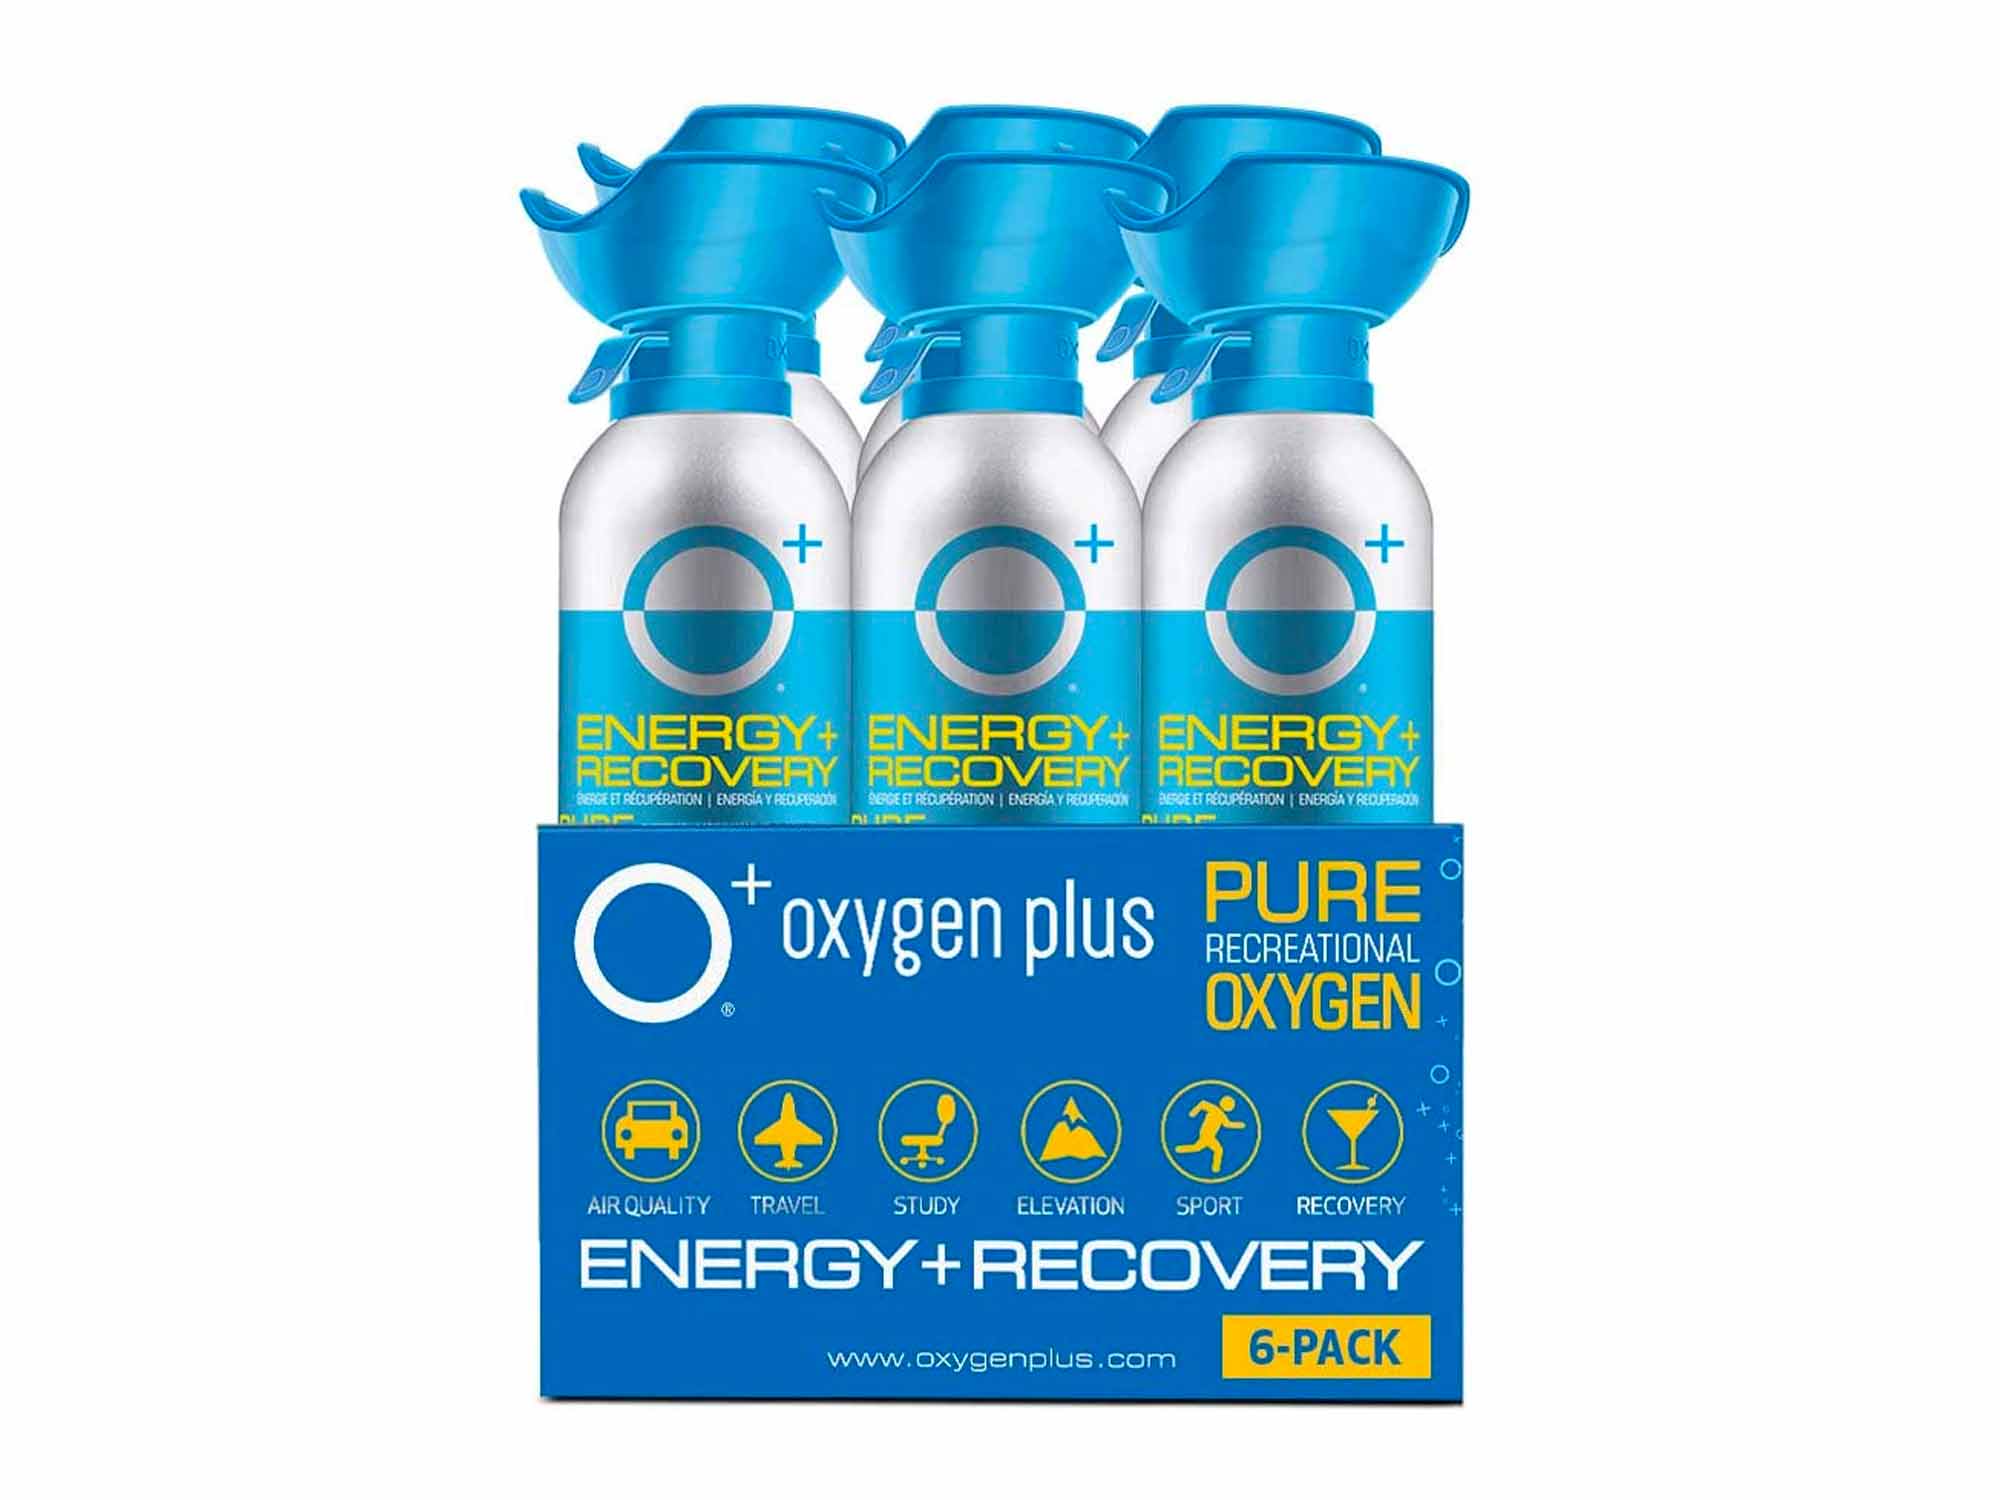 Oxygen Plus 99.5% Pure Recreational Oxygen Cans – O+ Biggi 6-Pack – Energy & Recovery – 11 Liter Cans, 50+ Uses – FDA-Registered Facility Oxygen – Canned Oxygen for Sports and Post Workout